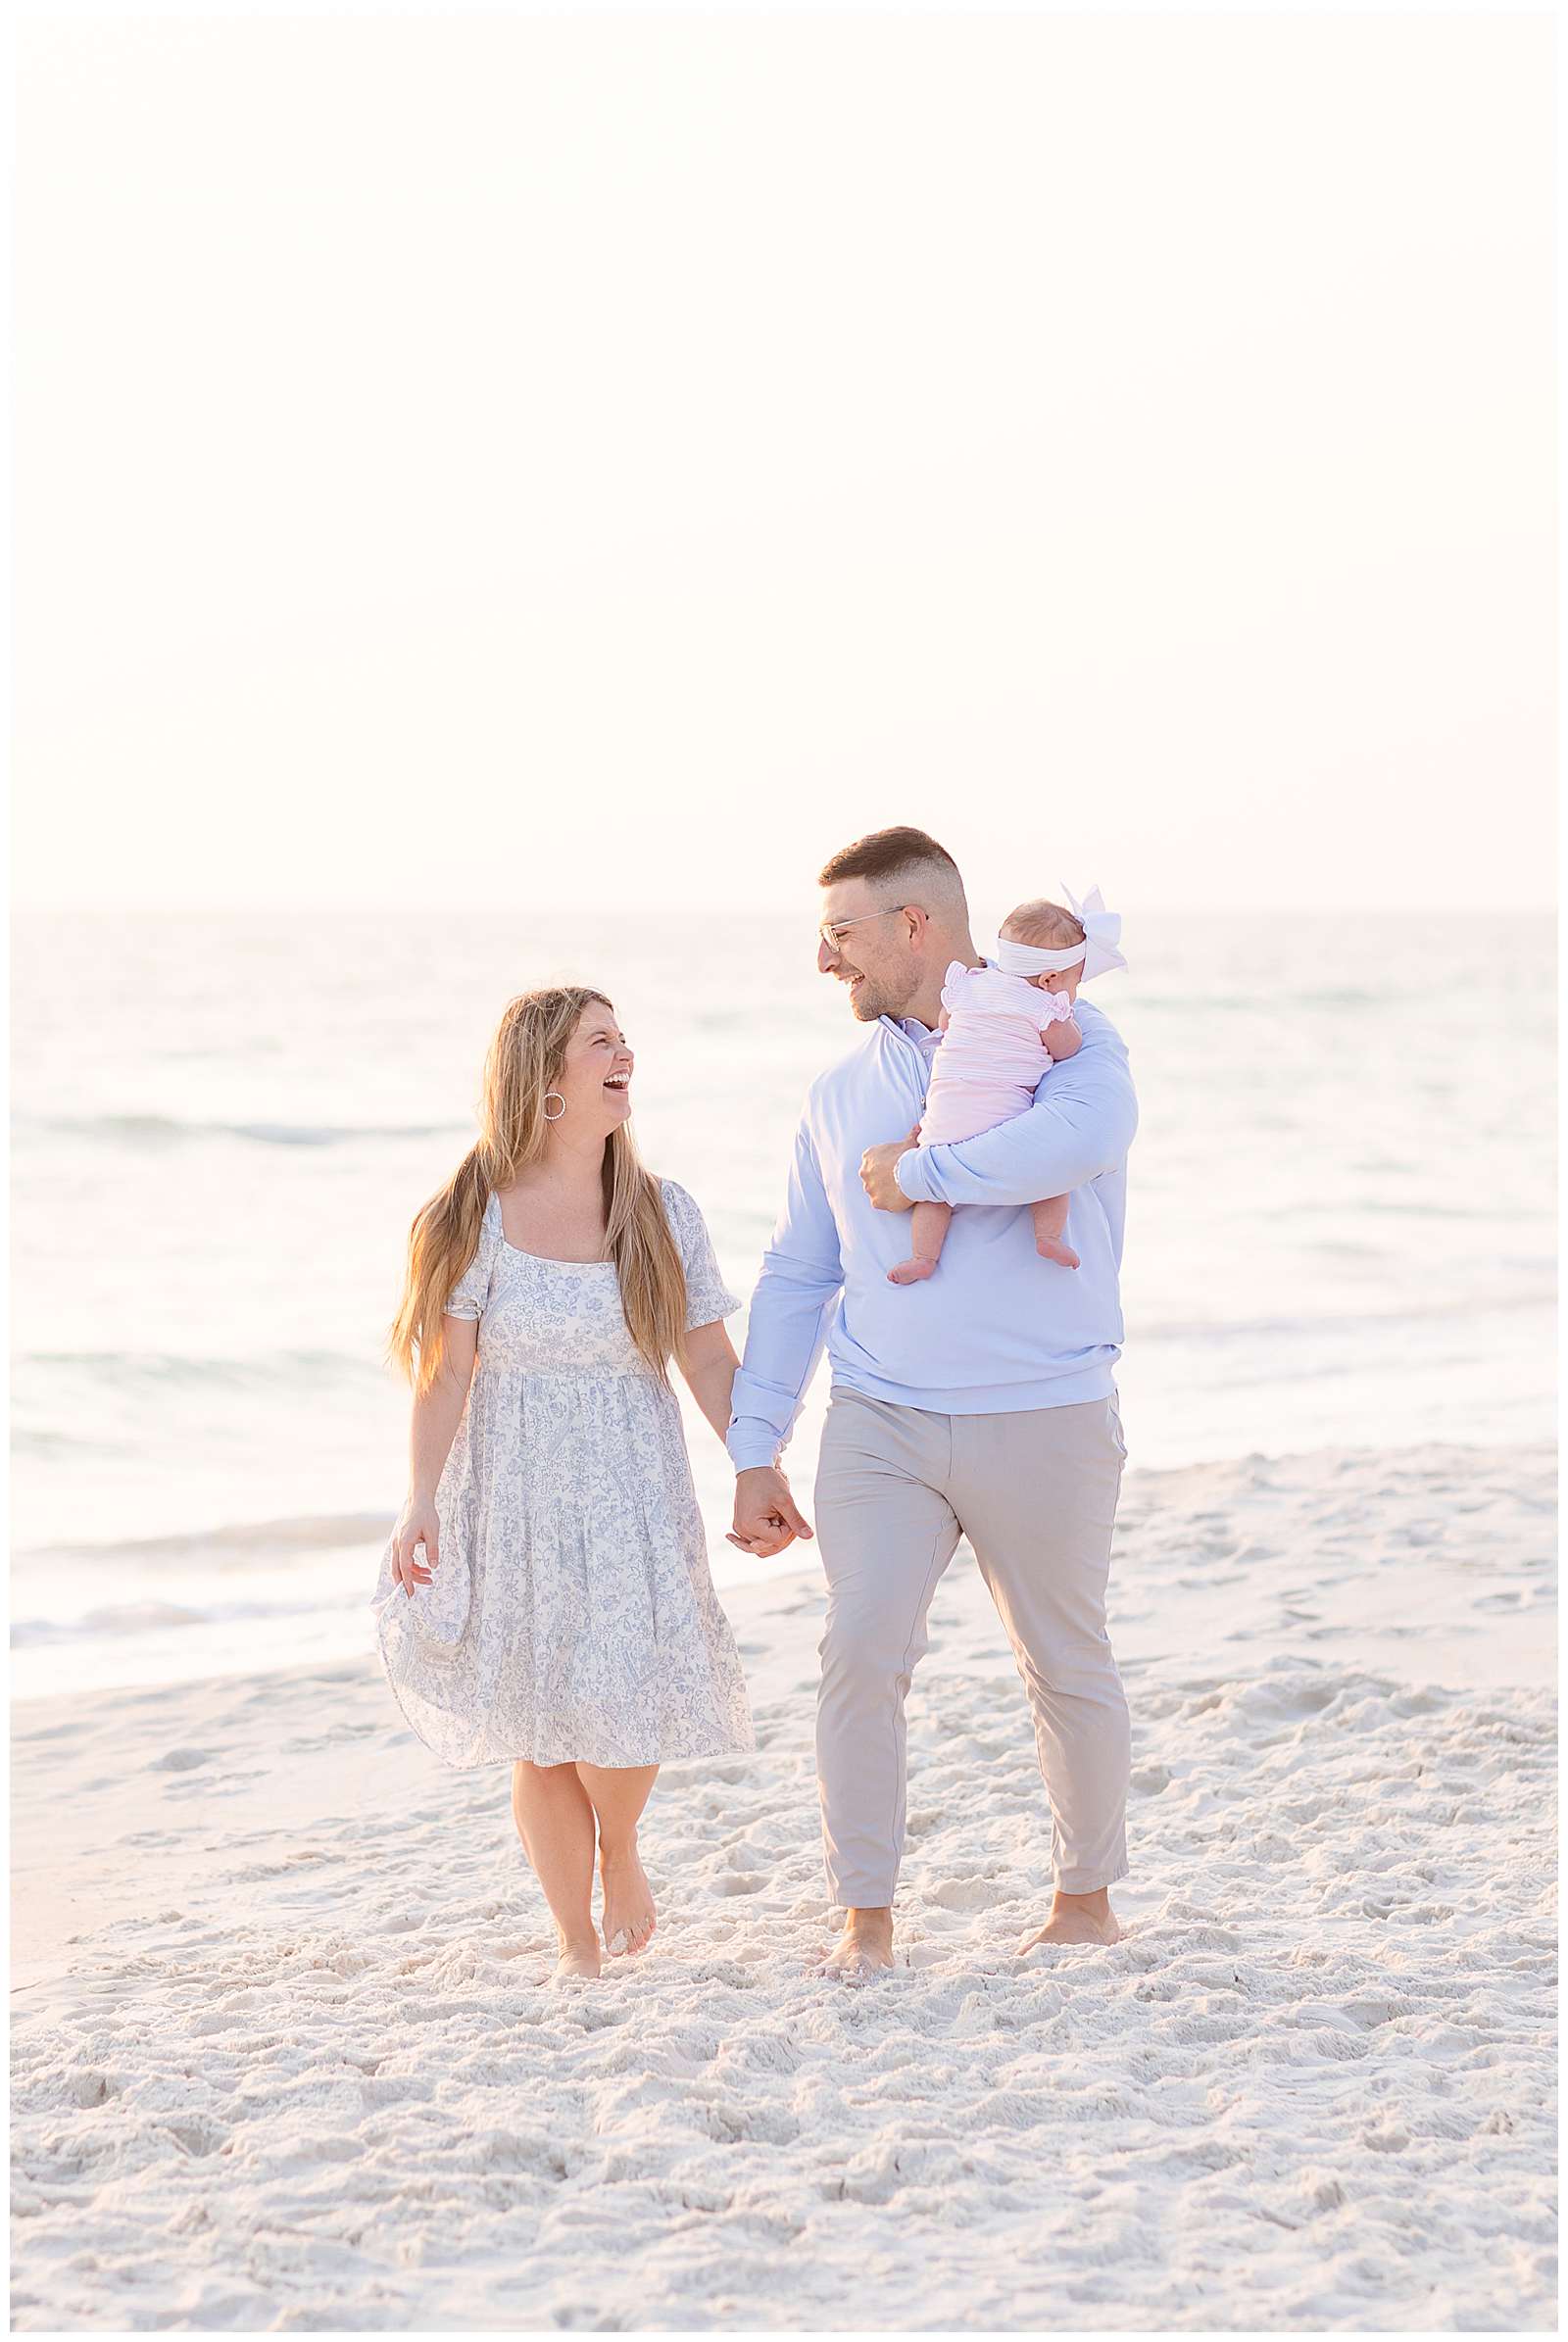 Rosemary family beach session with Rebecca Rice Photo has new parents holding hands and looking at each other as they walk along the beach and the husband holds their baby girl in one arm as she looks over his shoulder.  Click to see more of this family on the blog today!  -rebeccaricephoto.com